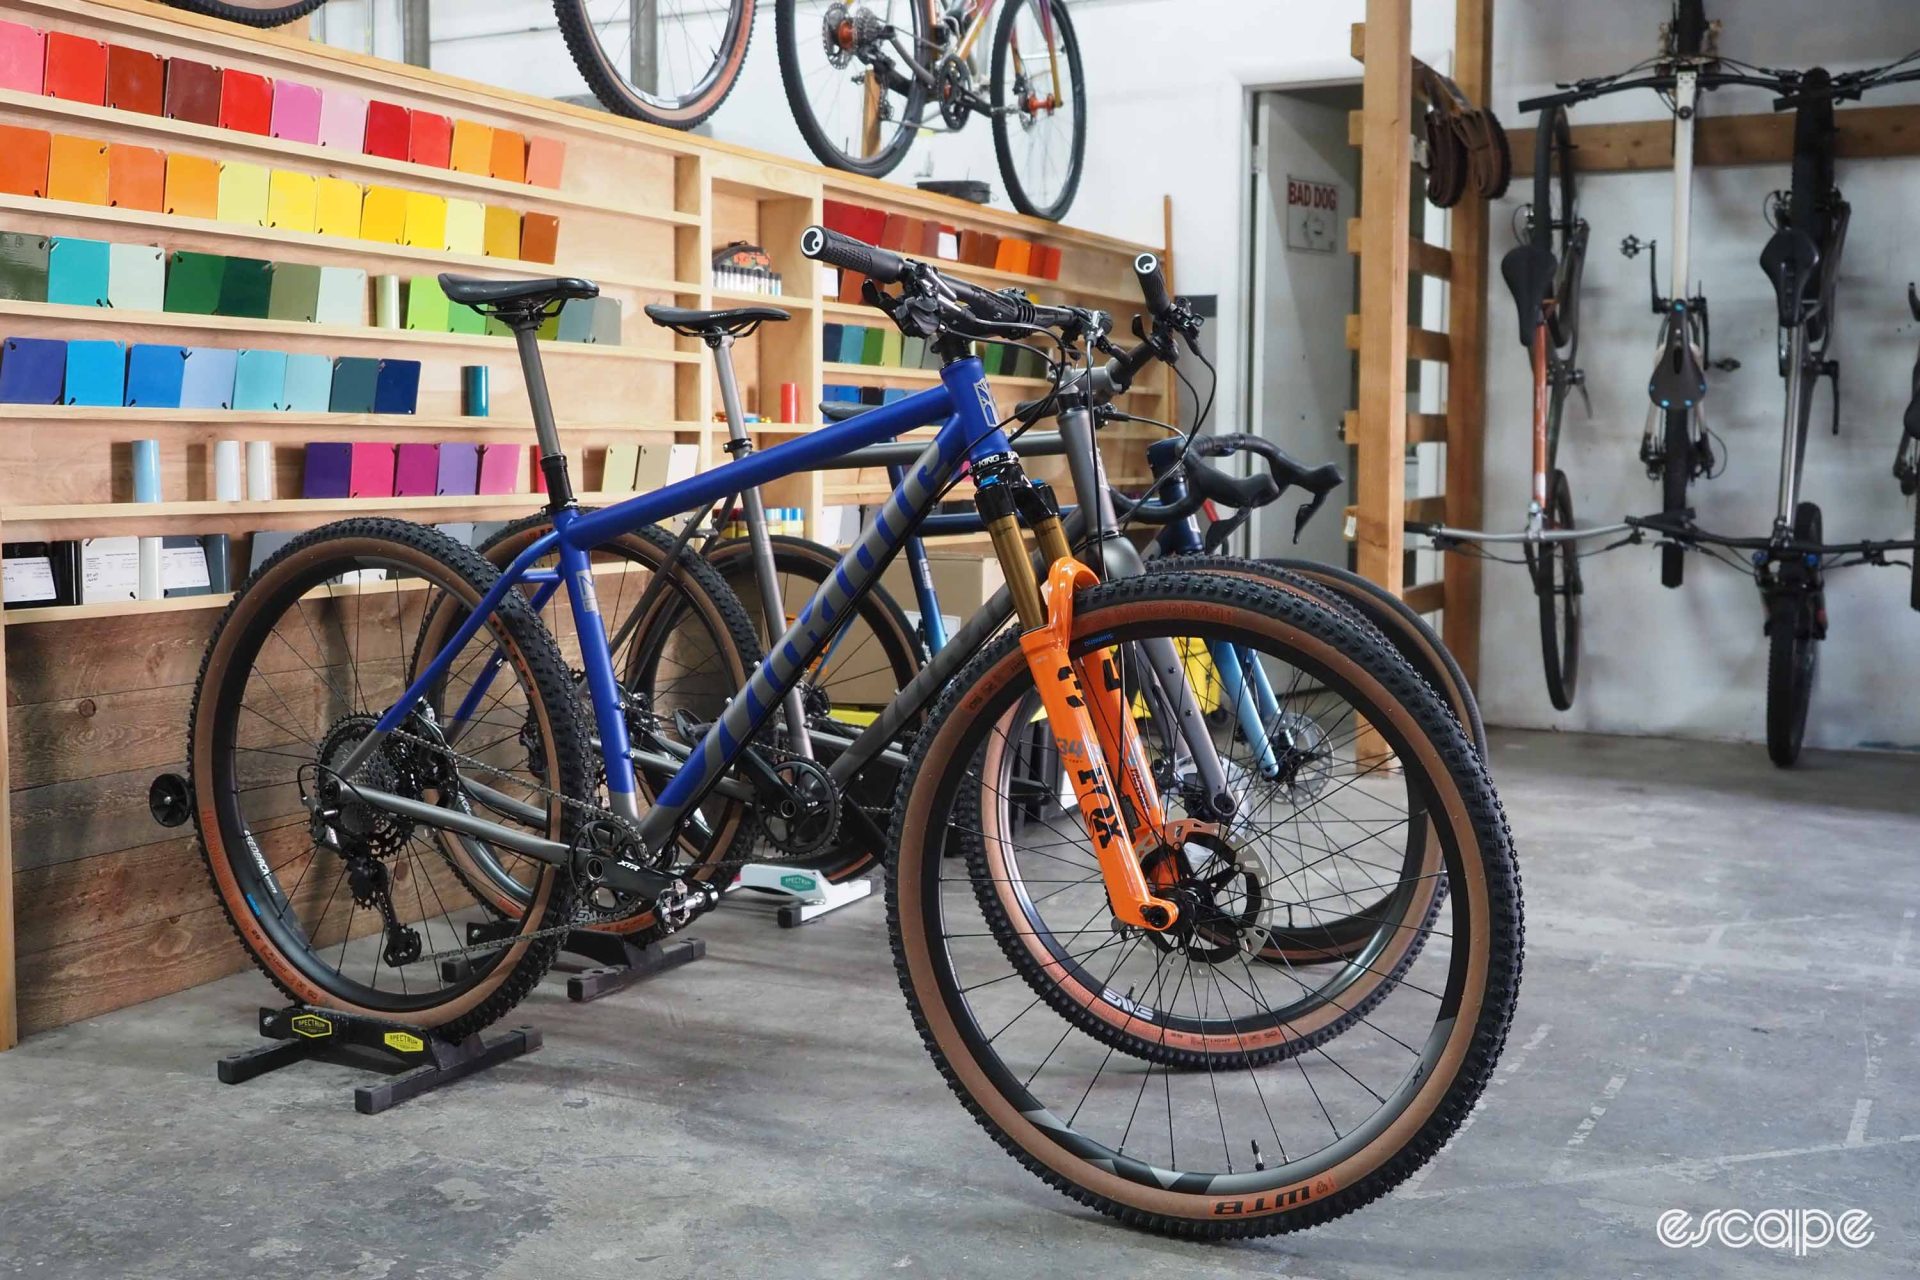 Several demo bikes sit on the Mosaic shop floor, including a hardtail mountain bike. Behind are rows of paint chips.